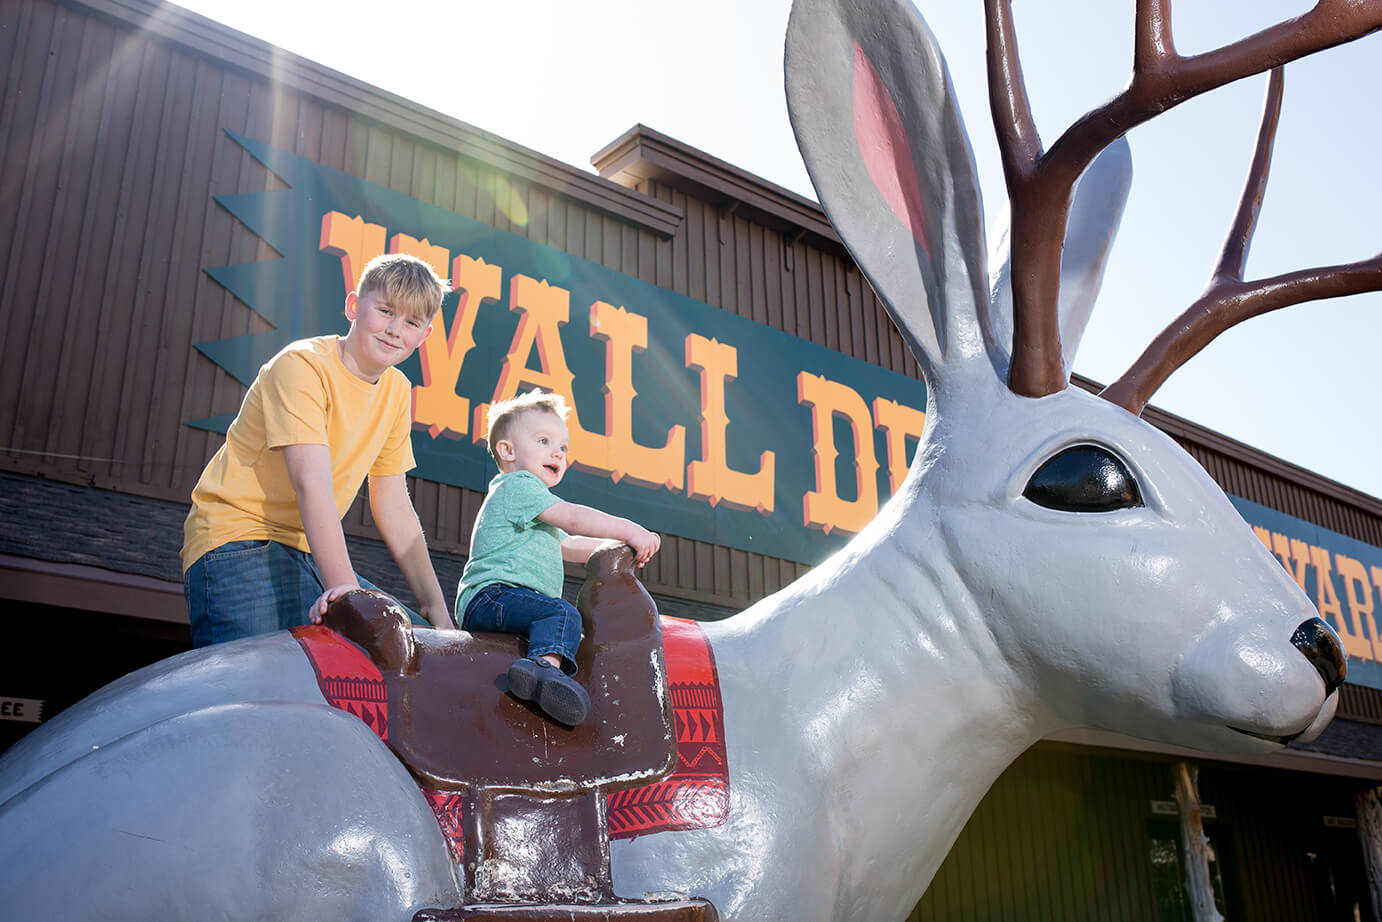 children riding the giant jackelope in wall drug's back yard